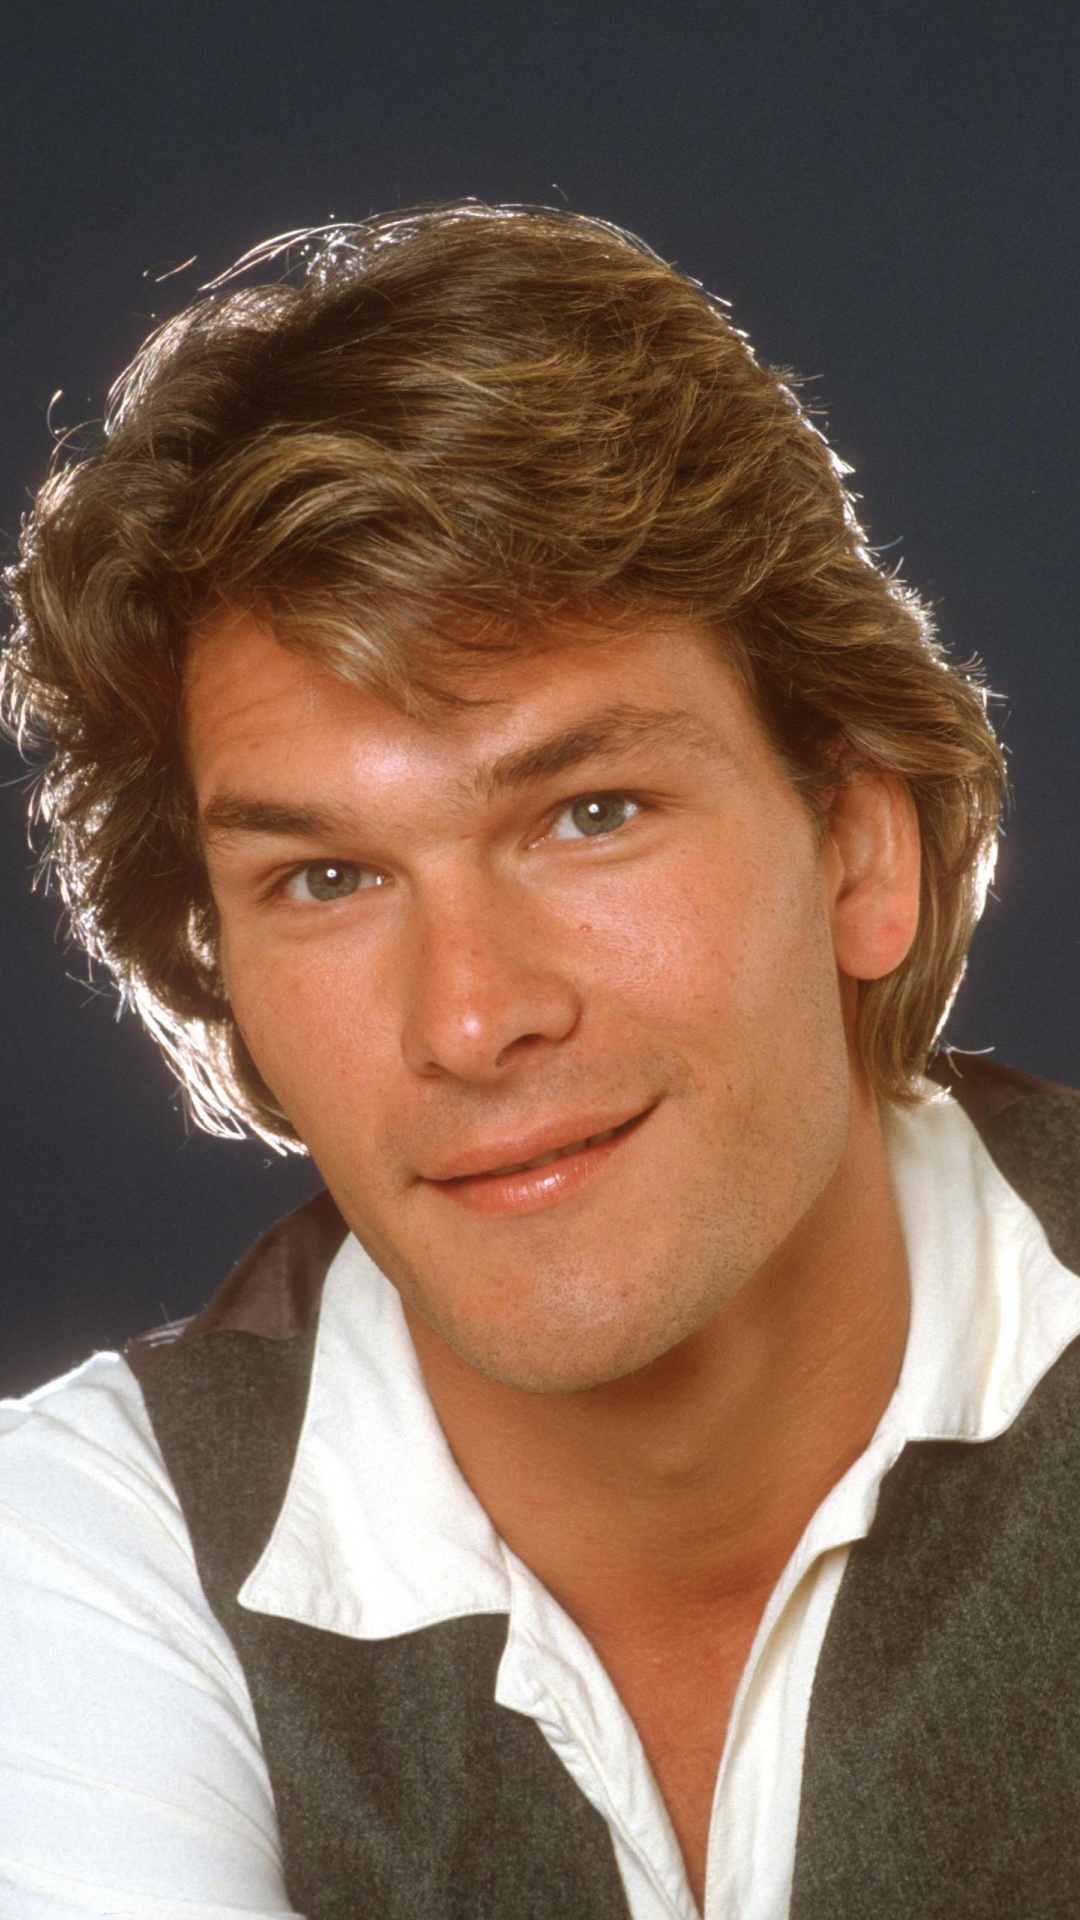 Patrick Swayze, Download 27 wallpapers, High Quality, Explore 27 wallpapers, 1080x1920 Full HD Handy